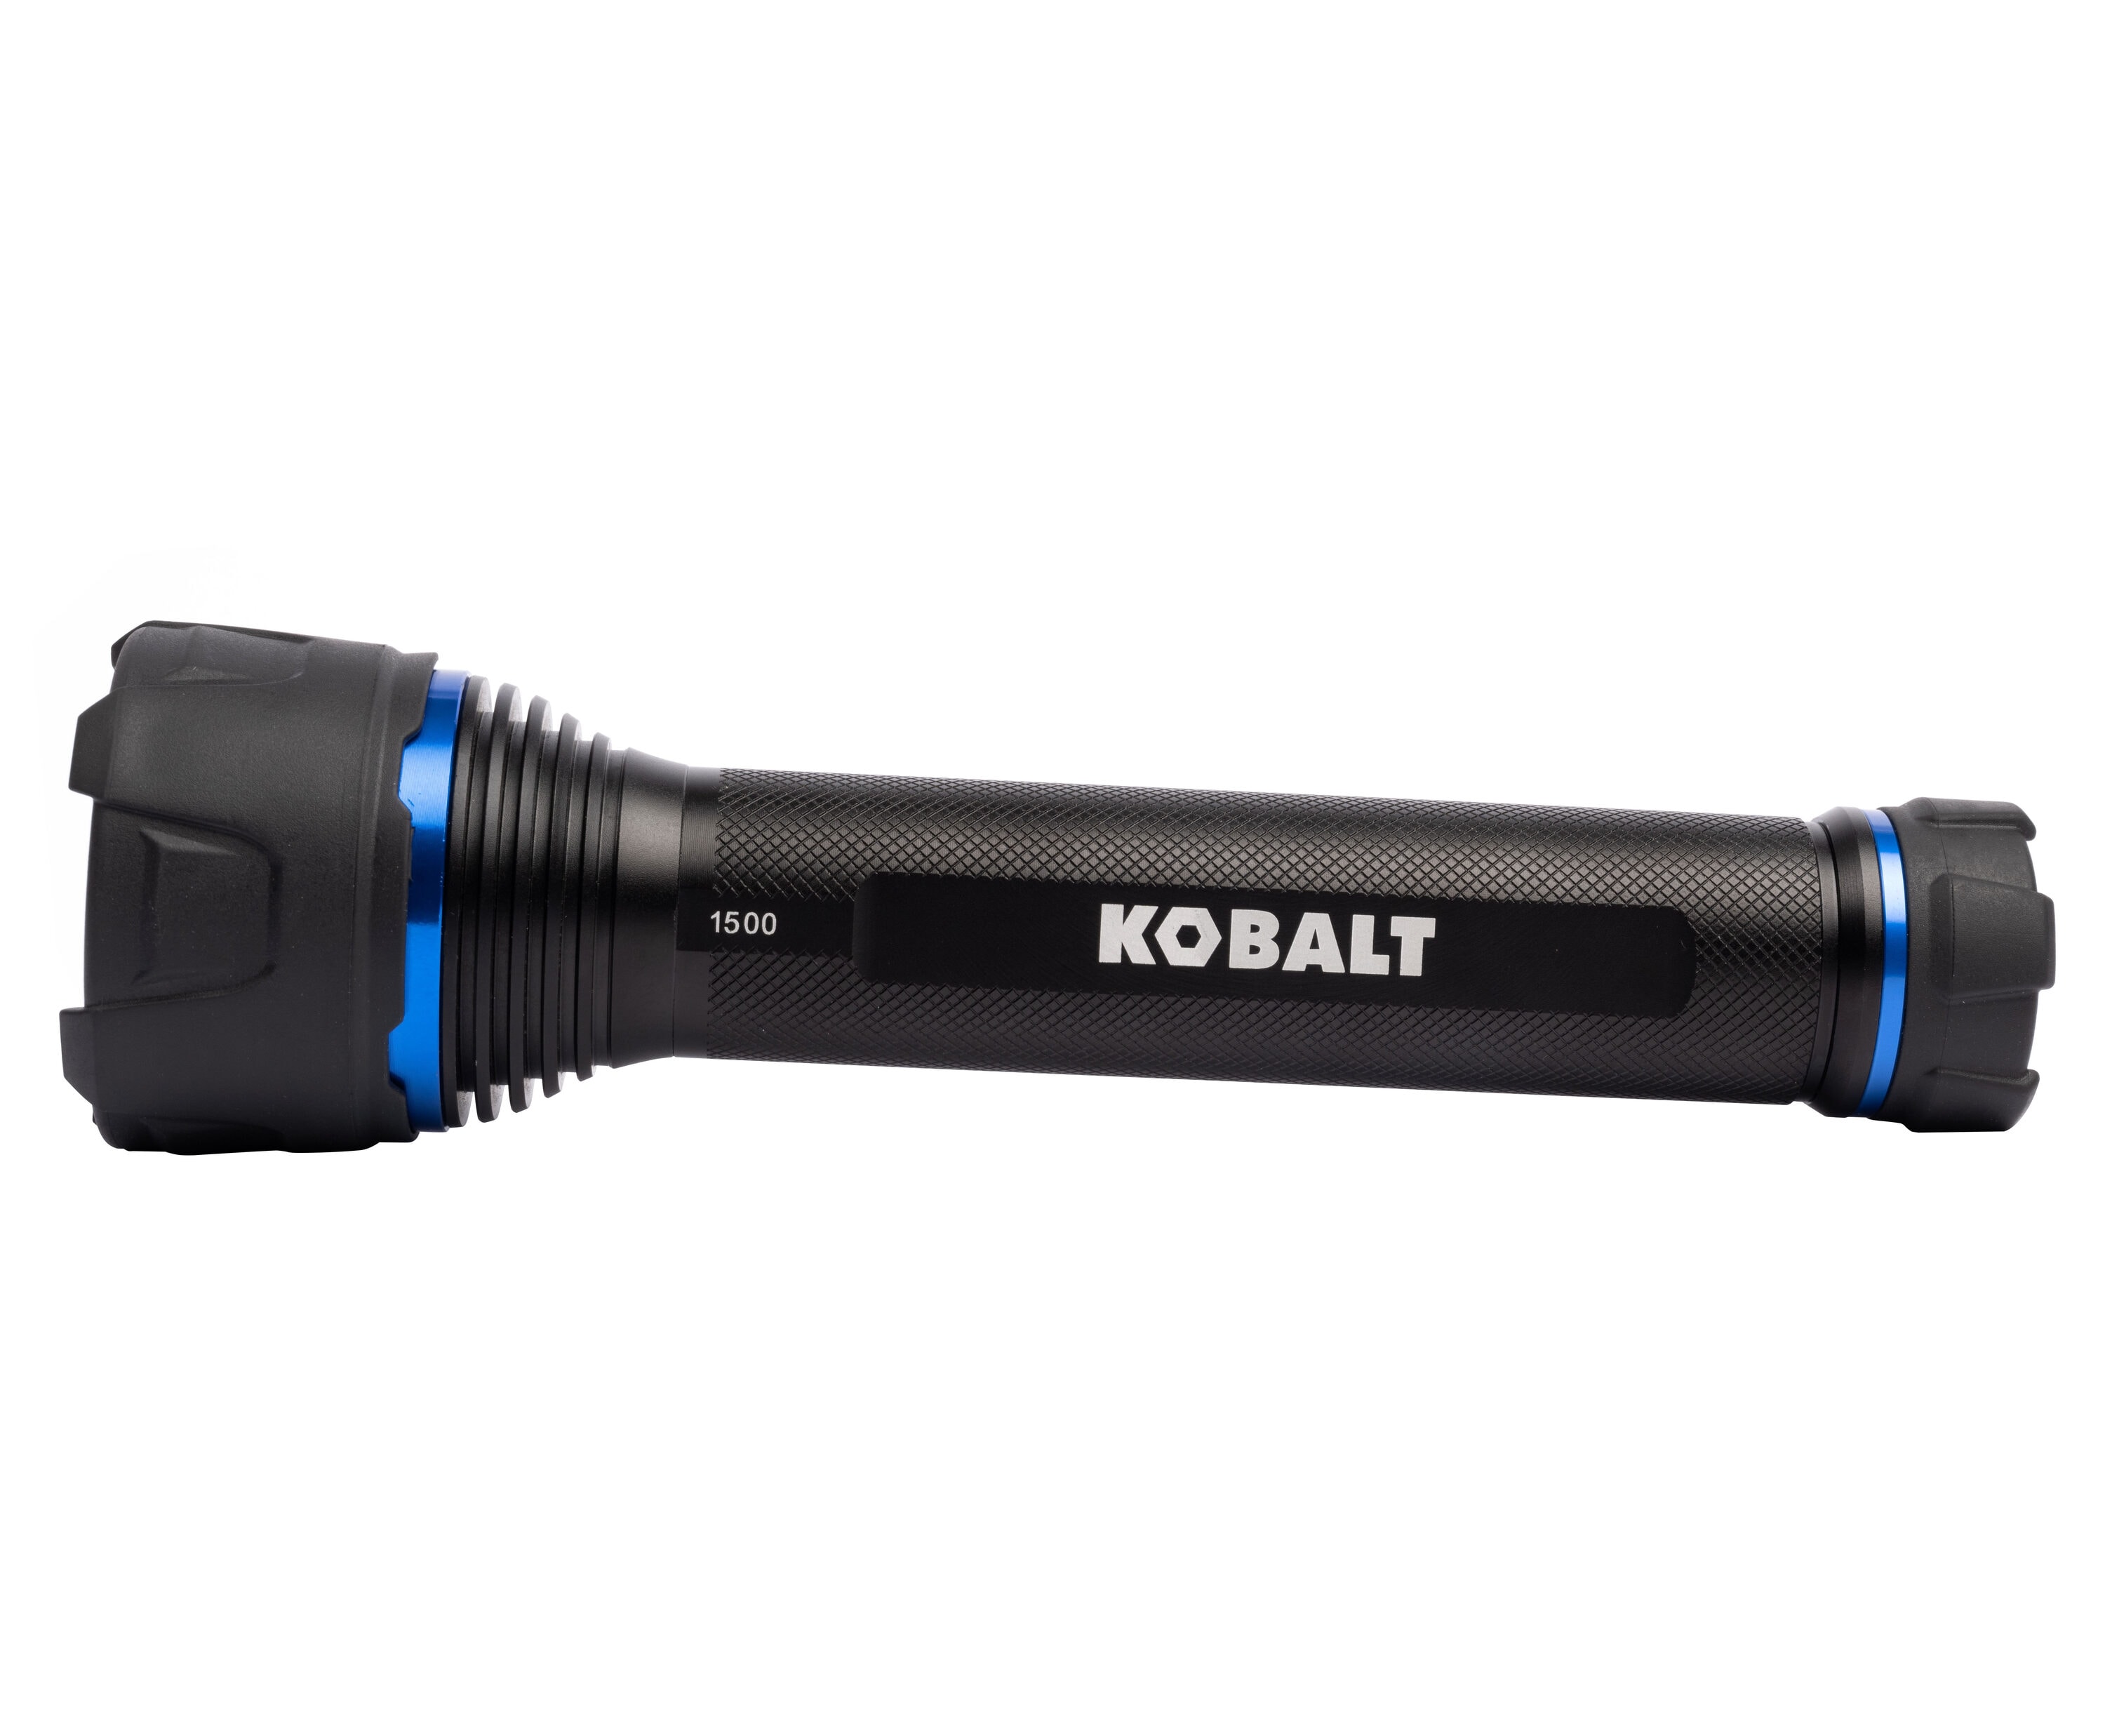 Waterproof (AA at Spotlight Virtually Battery Included) Kobalt Flashlight Flashlights department 1500-Lumen the Indestructible LED Modes in 3